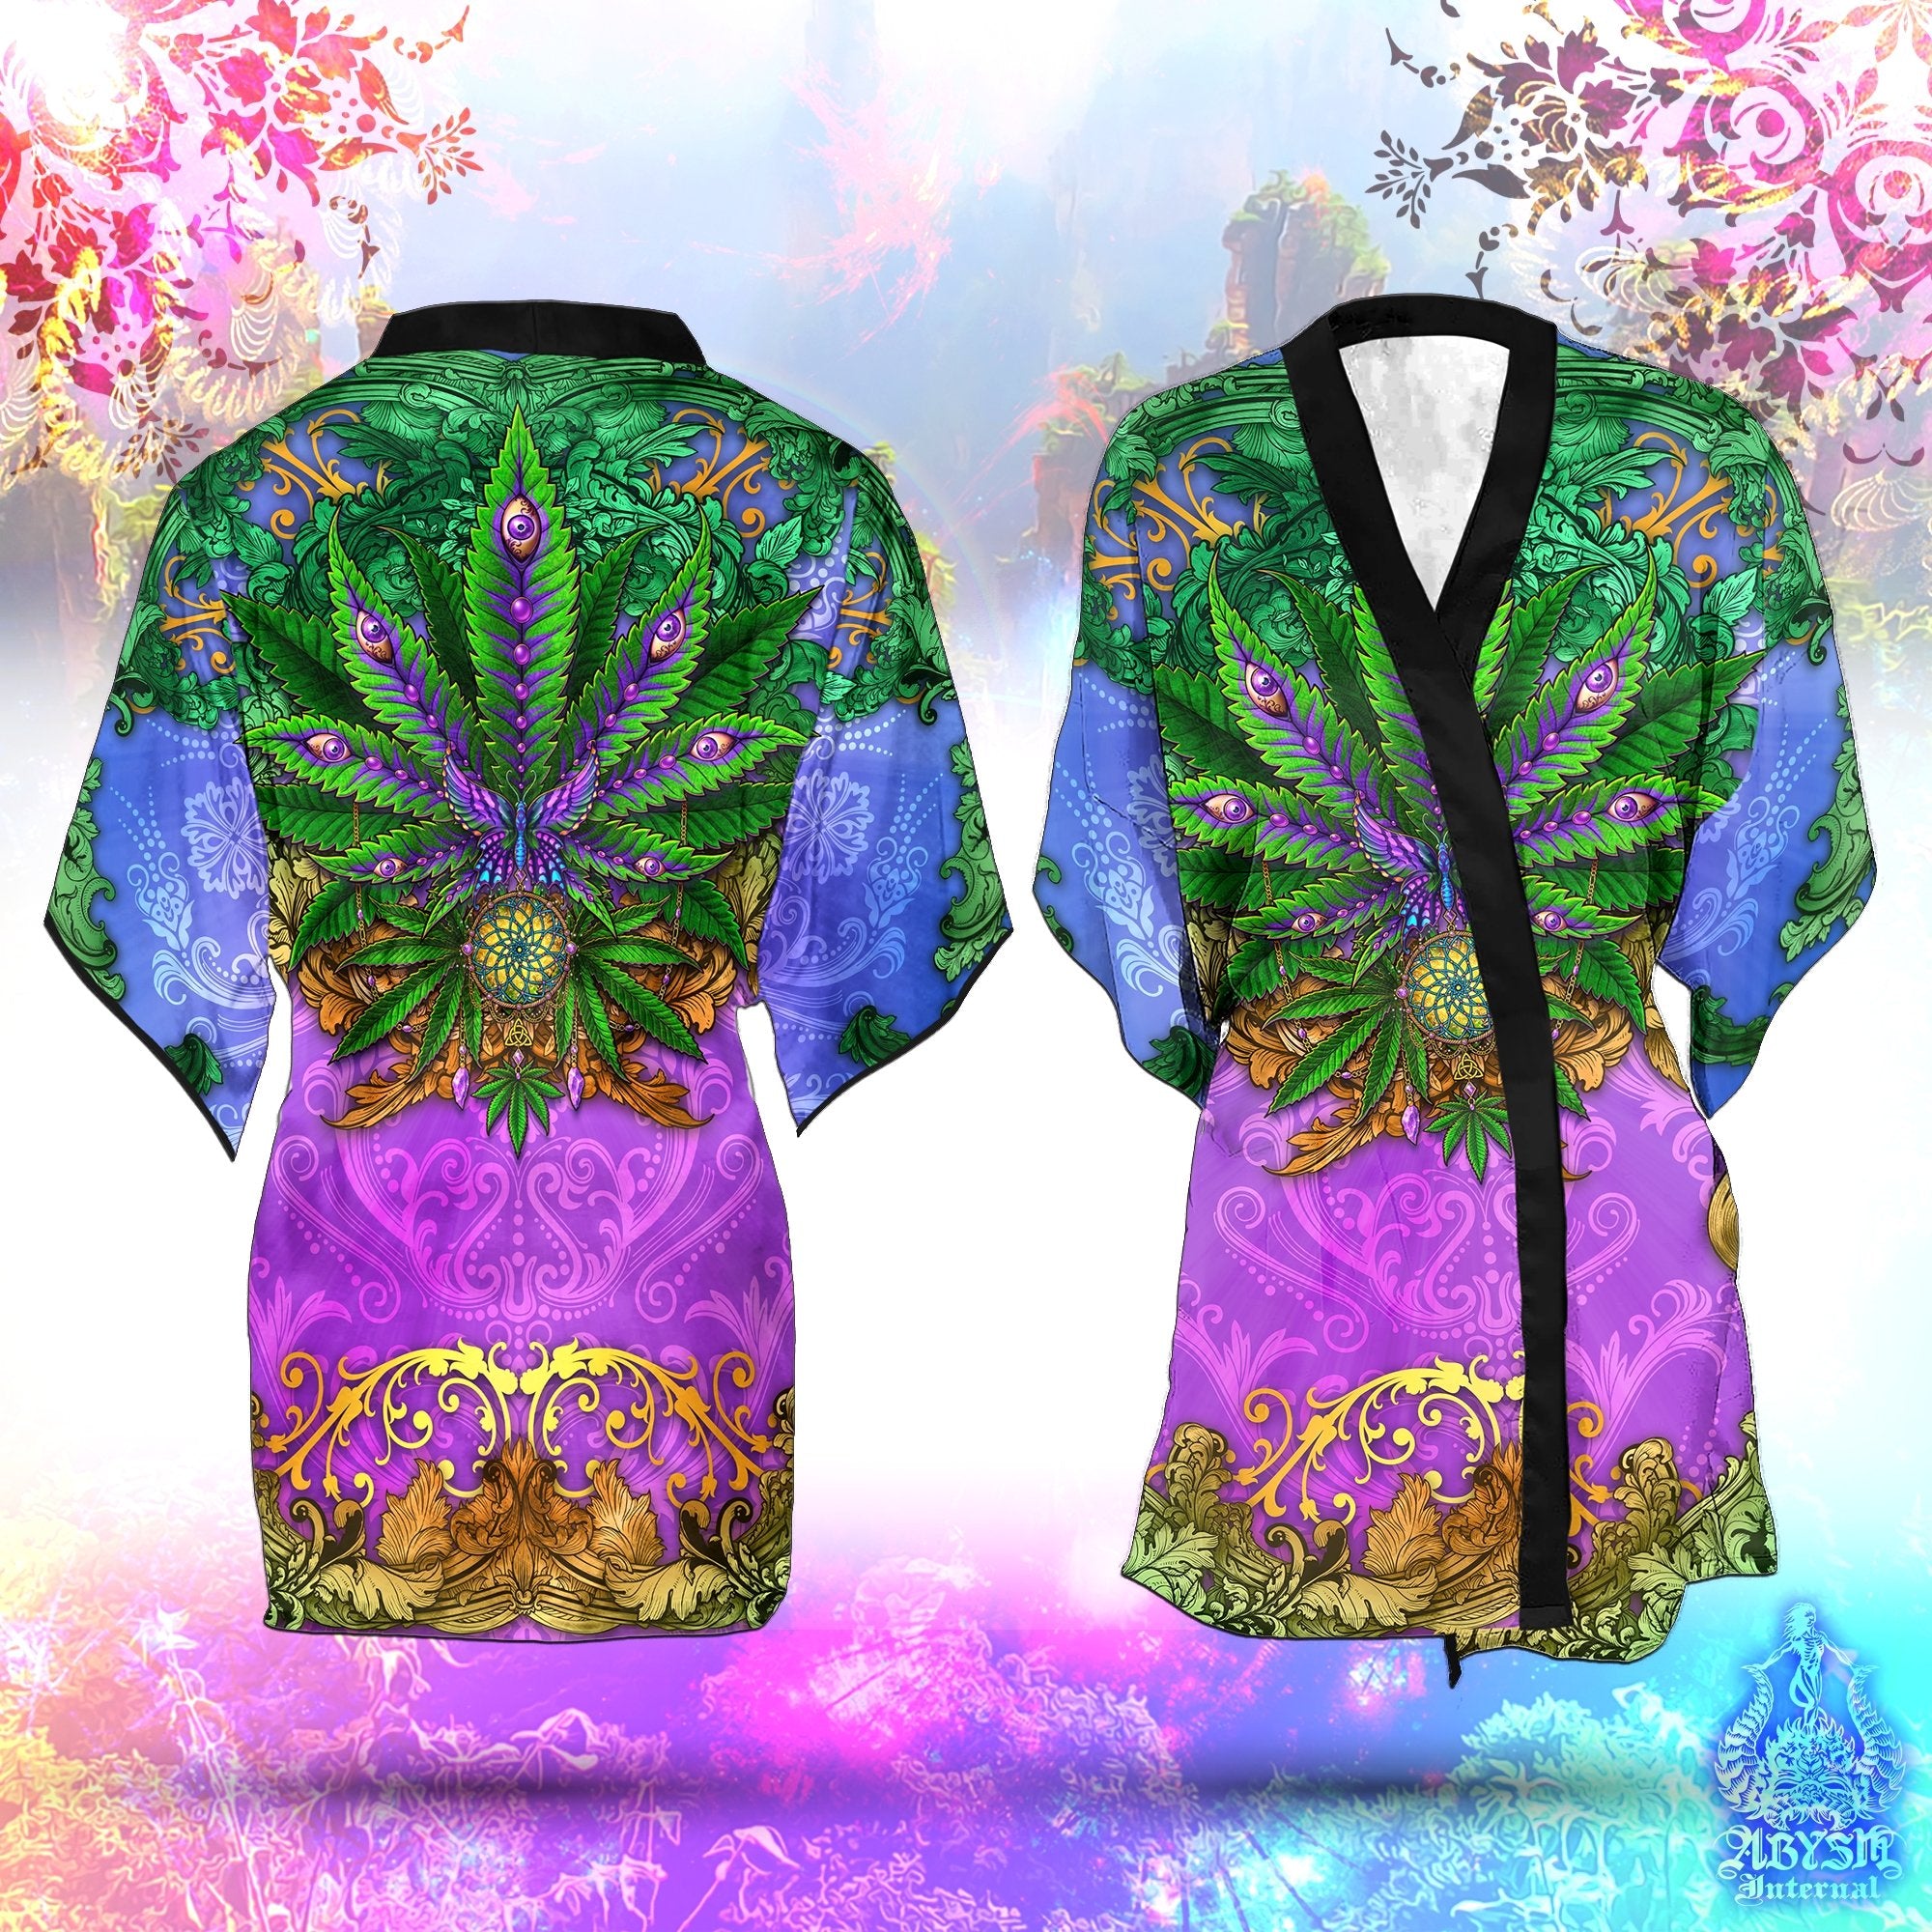 Weed Cover Up, Cannabis Outfit, Indie Party Kimono, Hippie Summer Festival Robe, 420 Gift, Alternative Clothing, Unisex - Marijuana, Nature - Abysm Internal